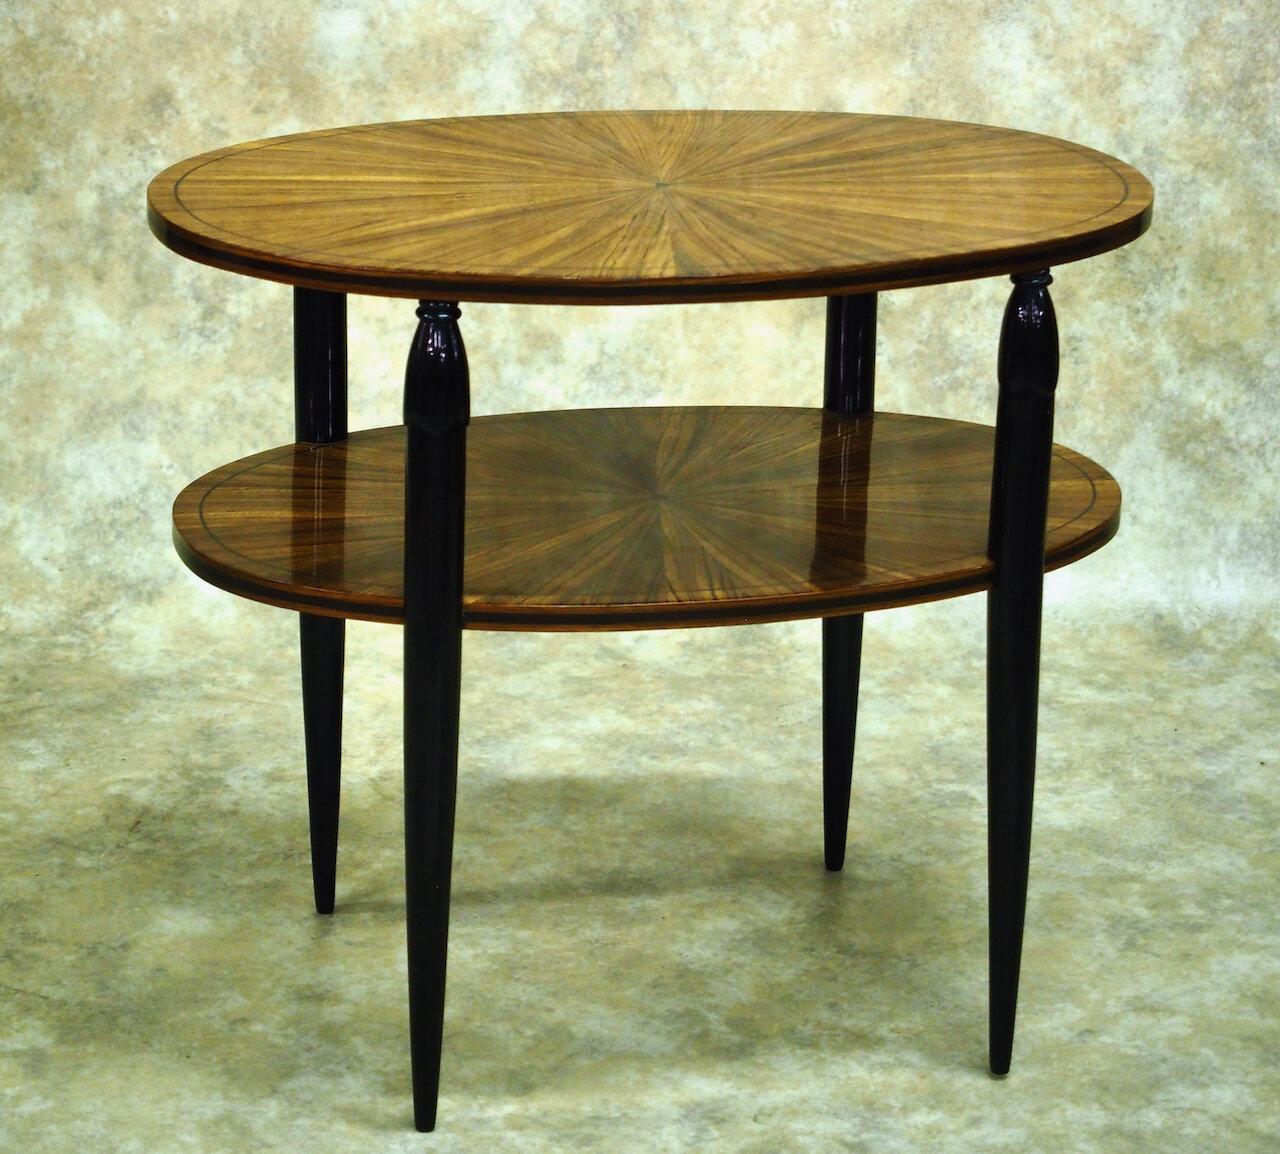 Art Deco 'Attributed to' Maurice Dufrene Oval Two-Tiered Table